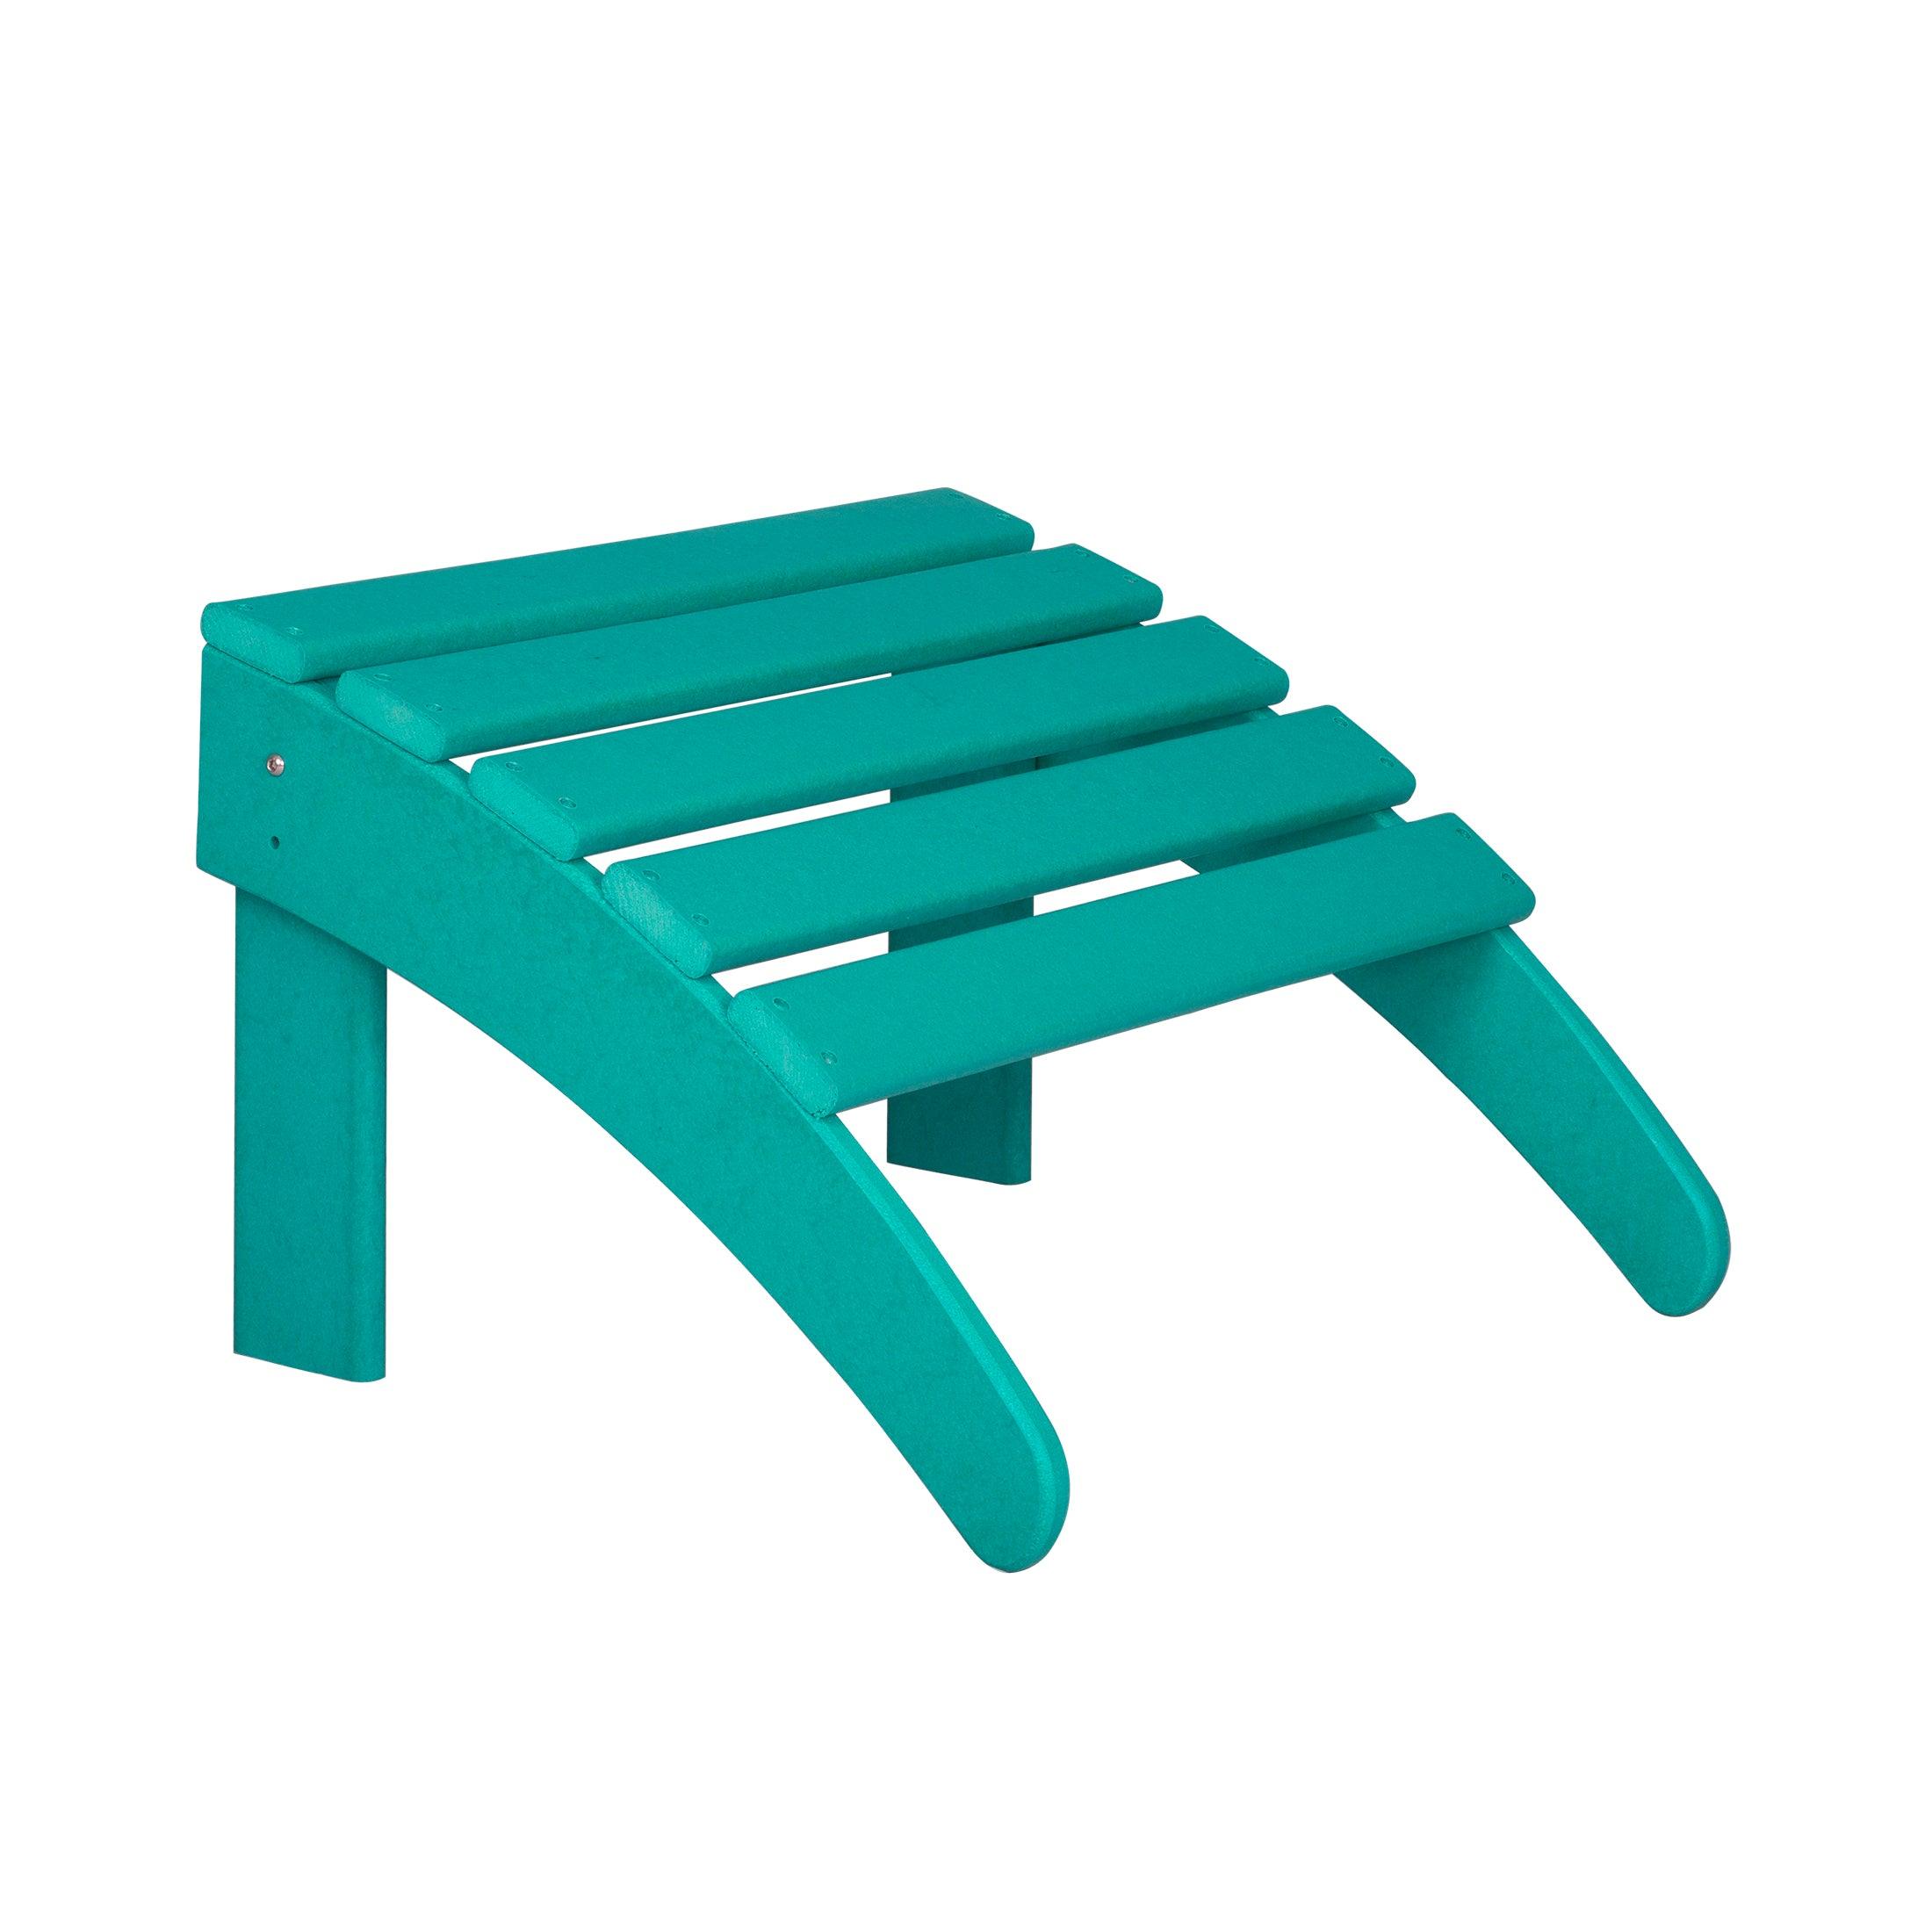 Costaelm Outdoor Adirondack Chair With Ottoman 2-Piece Set, Turquoise